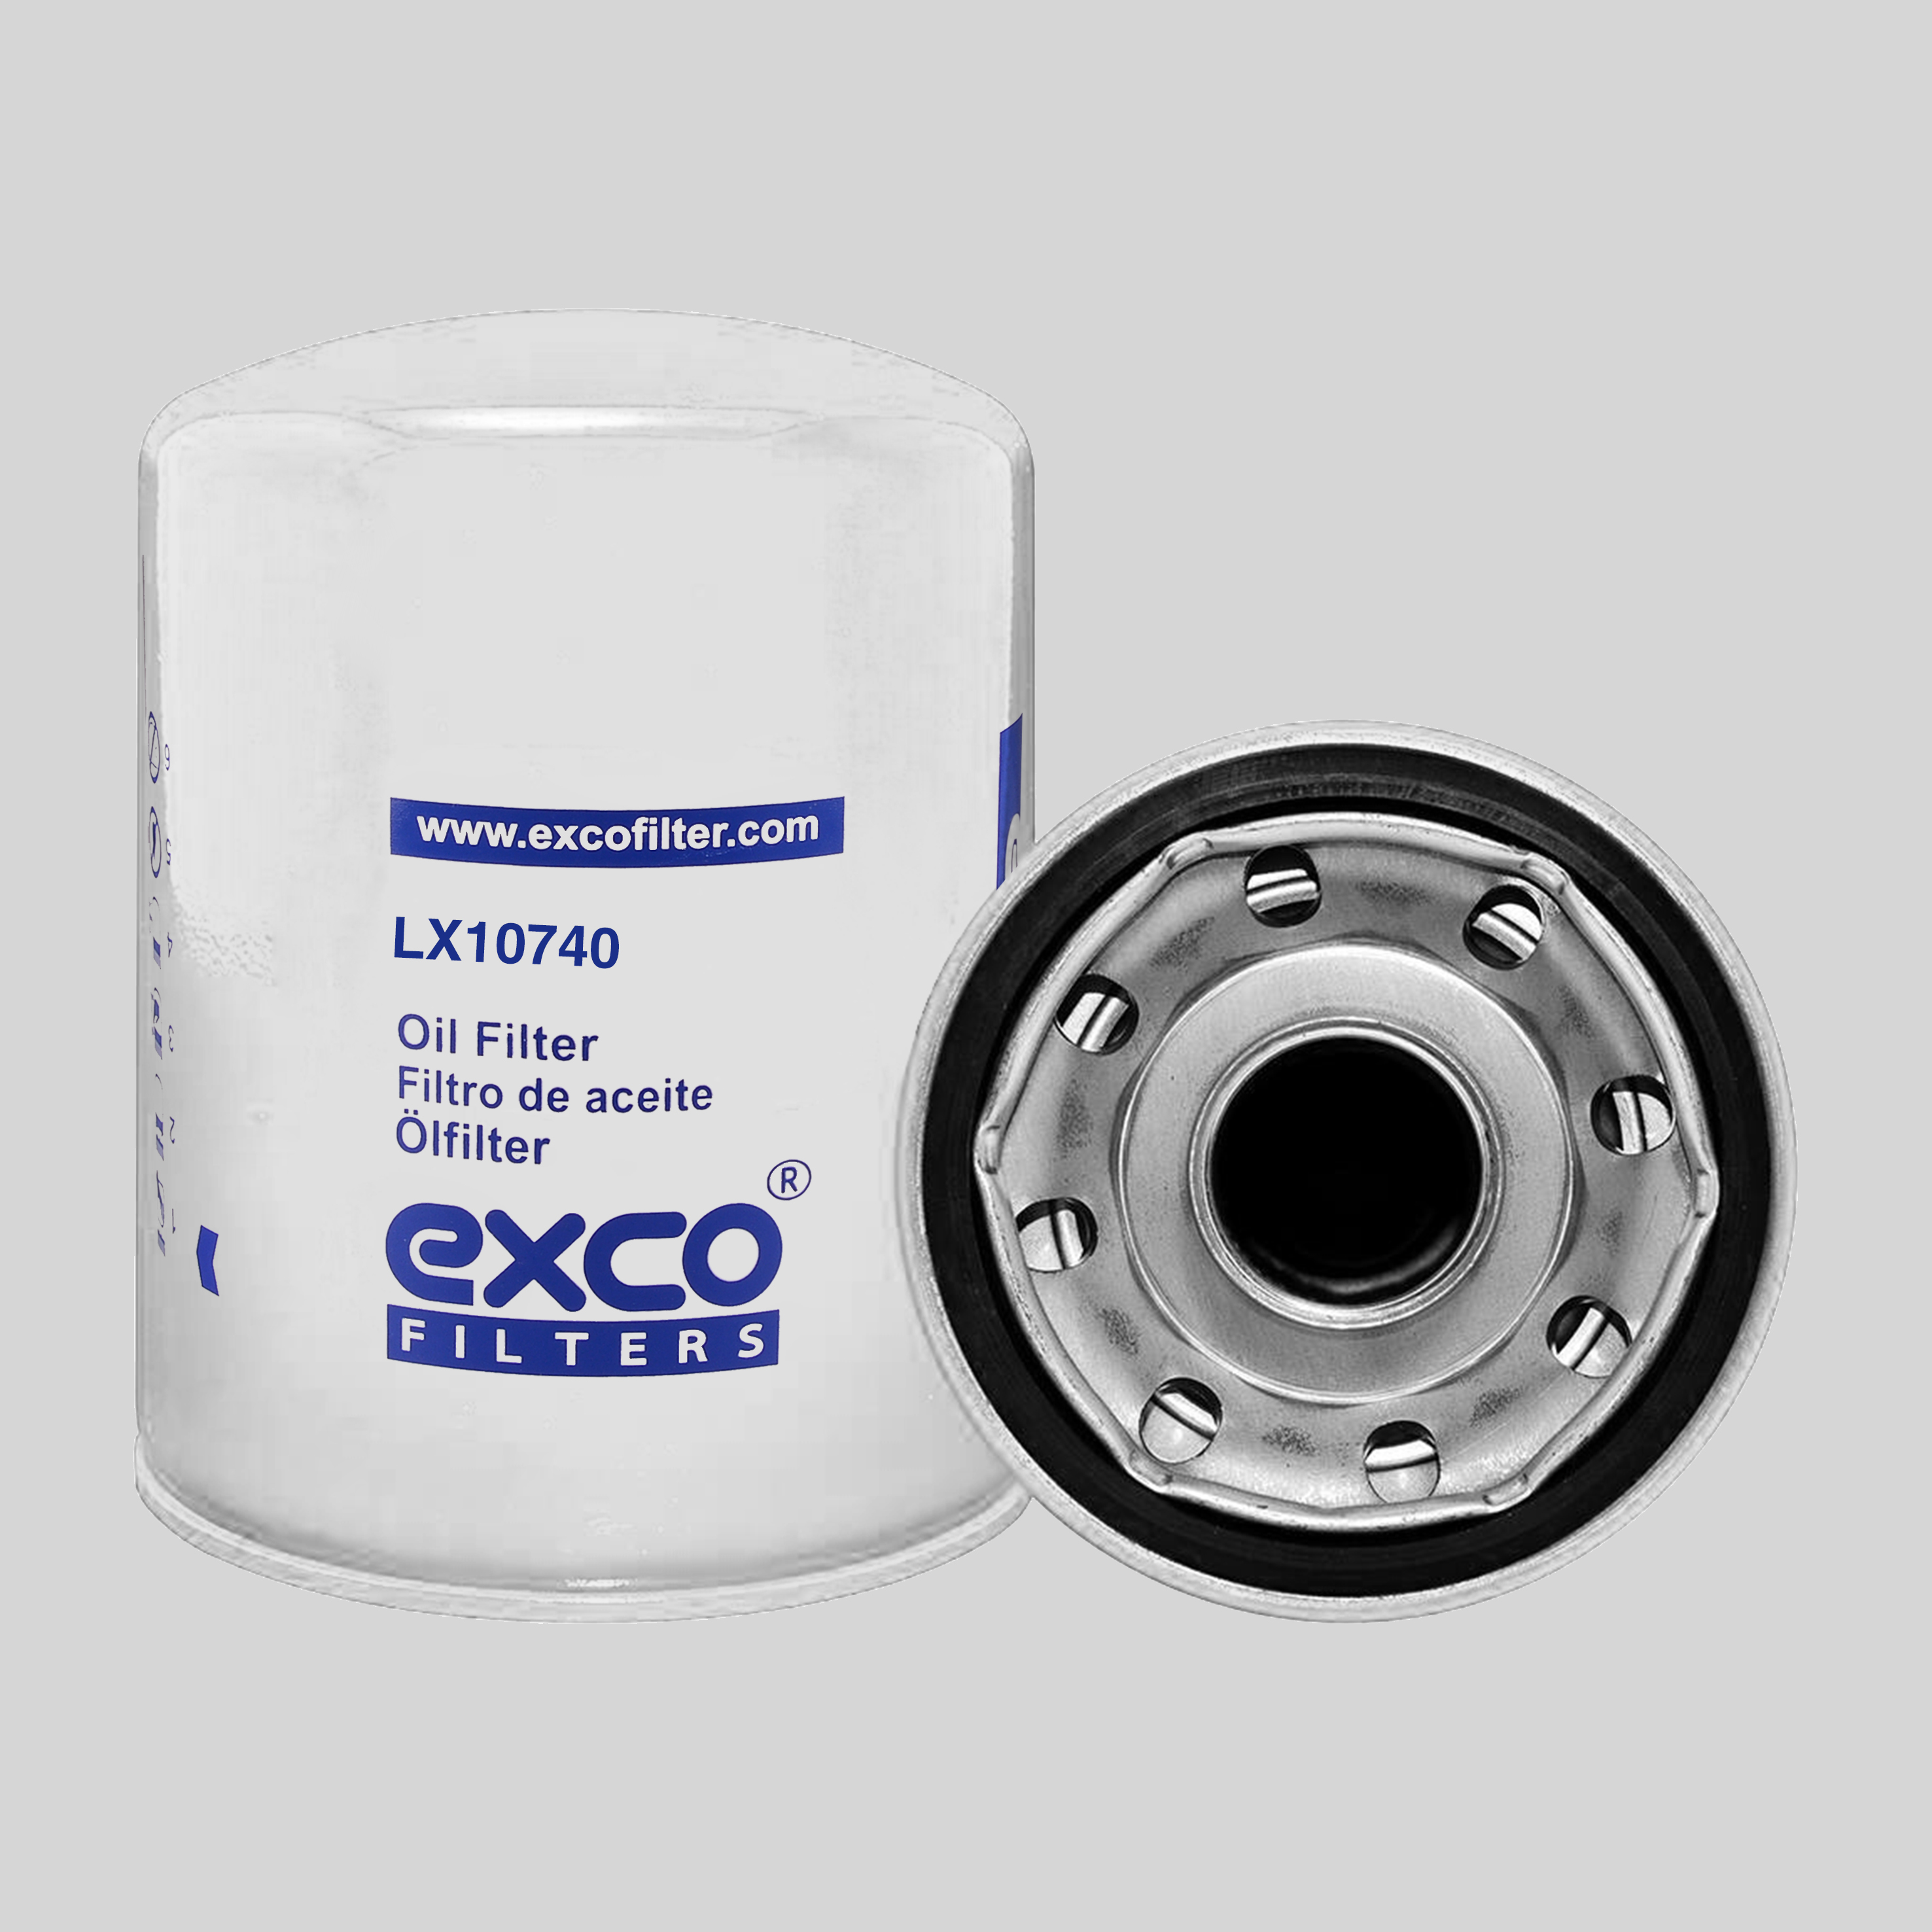 
                        
                                                                                                                HASTINGS LF273 - oil filter cross reference - excofilter
                                                                                    
                            